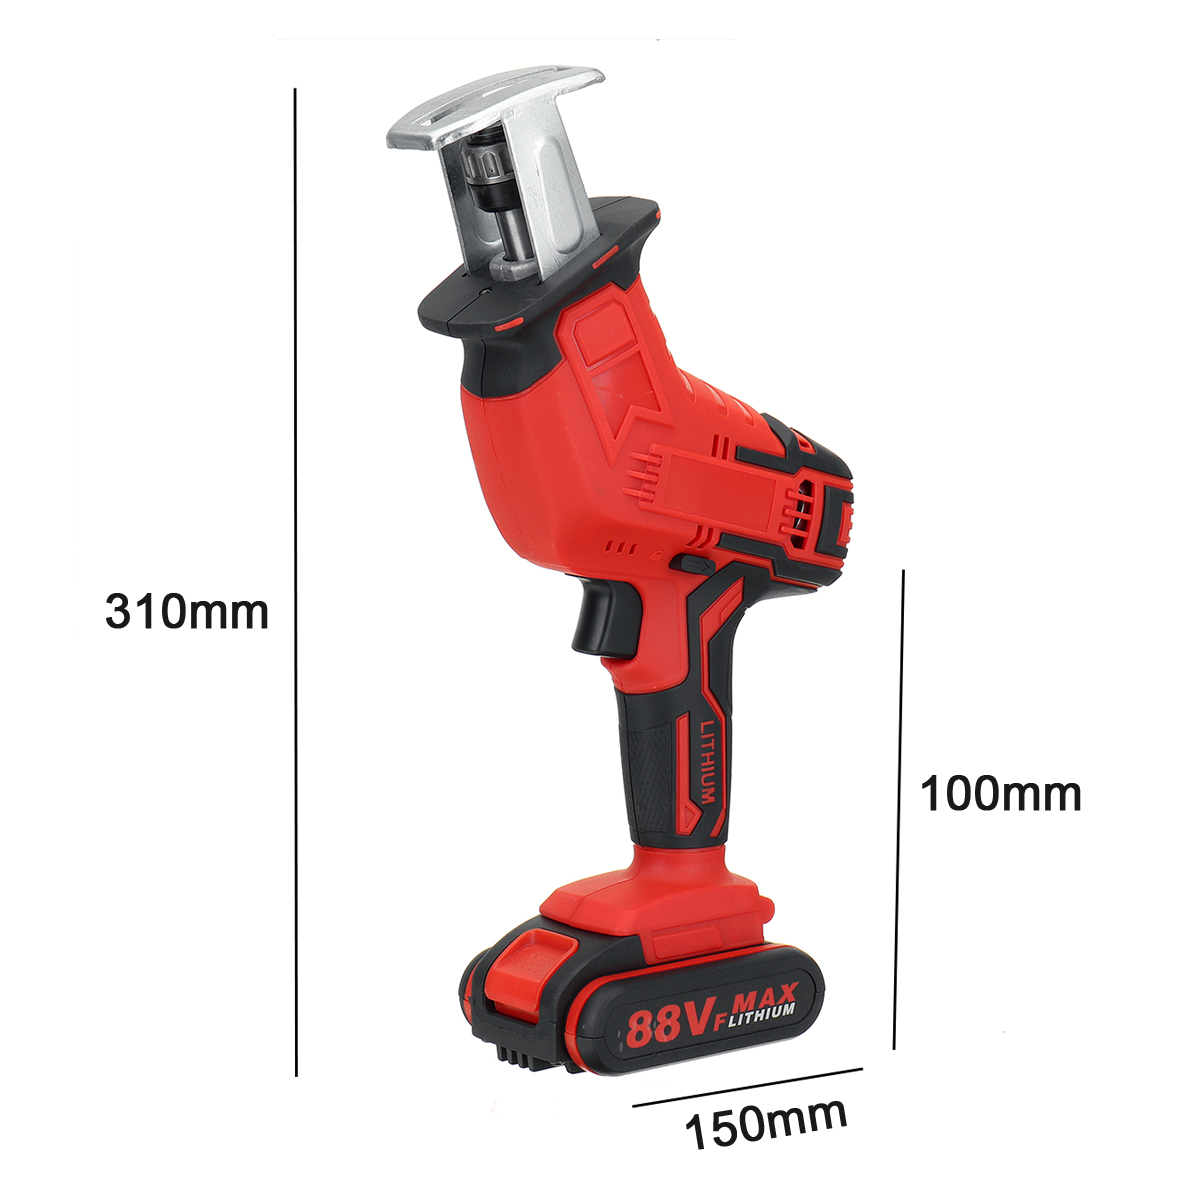 88VF-Electric-Reciprocating-Saw-Outdoor-Cordless-Portable-Saw-Woodworking-Cutter-1733463-9